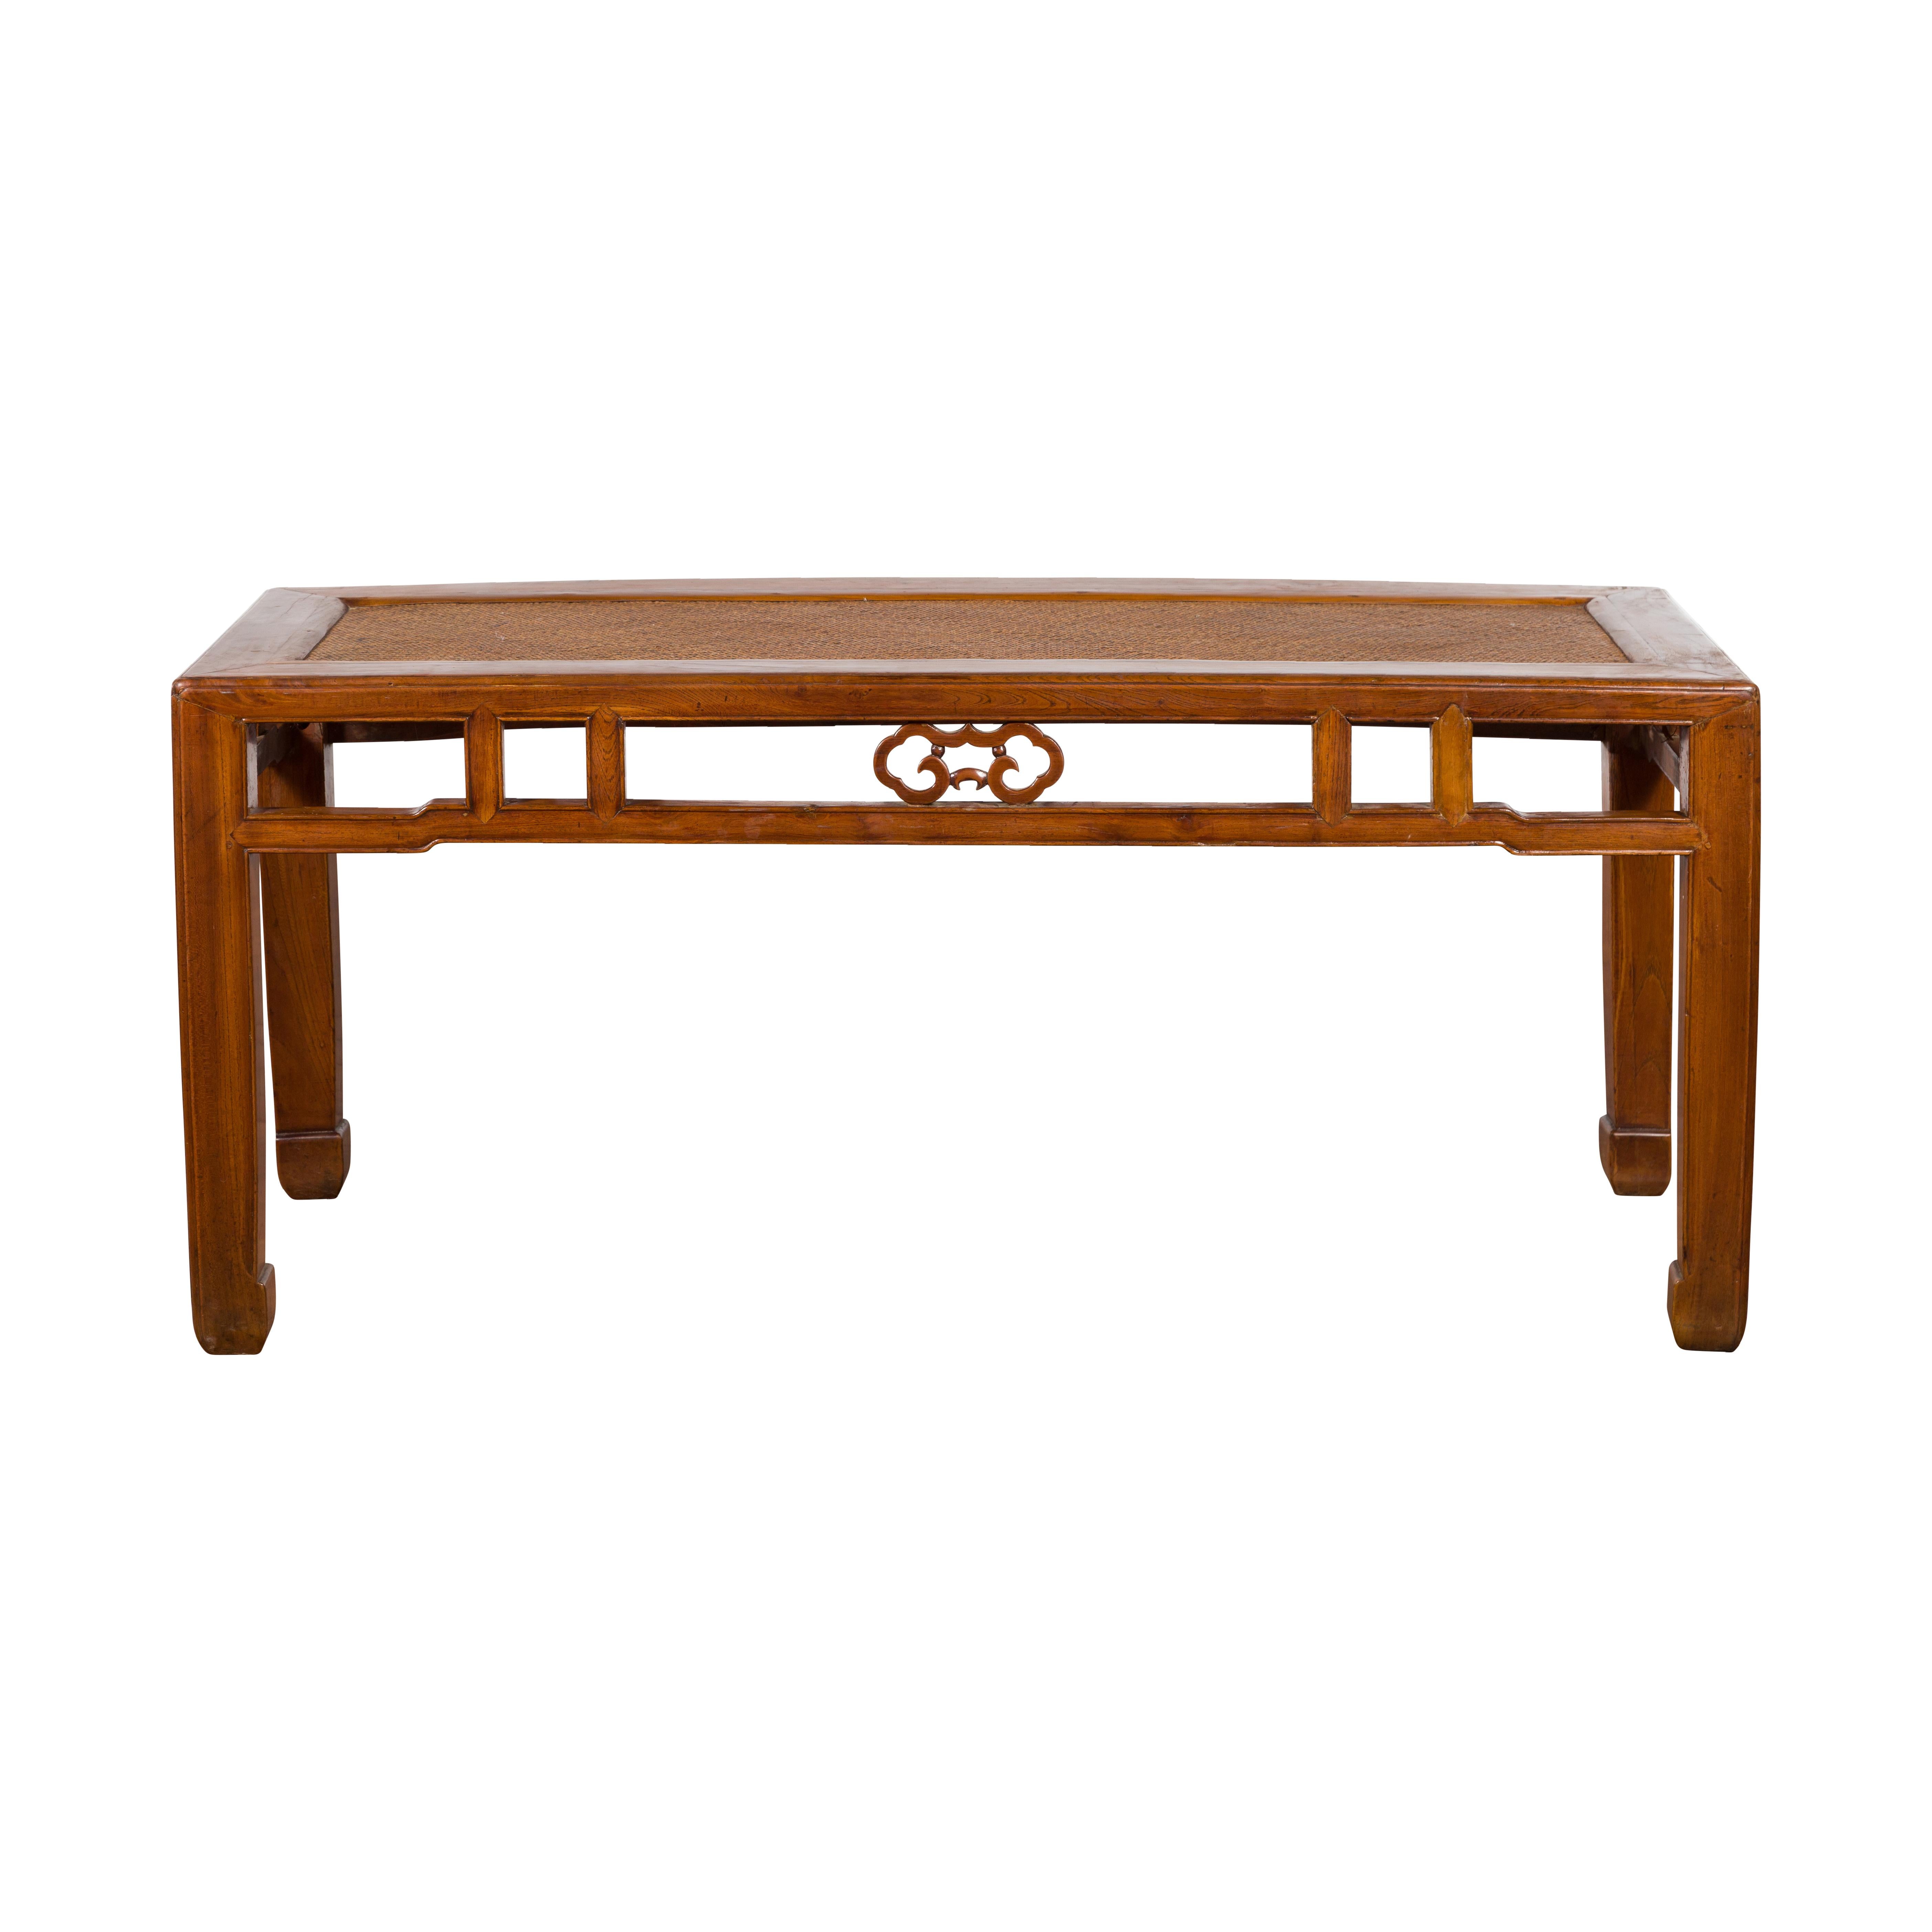 A Chinese Qing Dynasty period coffee table from the 19th century, with rattan top and horse hoof legs. Created in China during the Qing Dynasty, this wooden coffee table features a rectangular top with rattan inset, sitting above a pierced apron